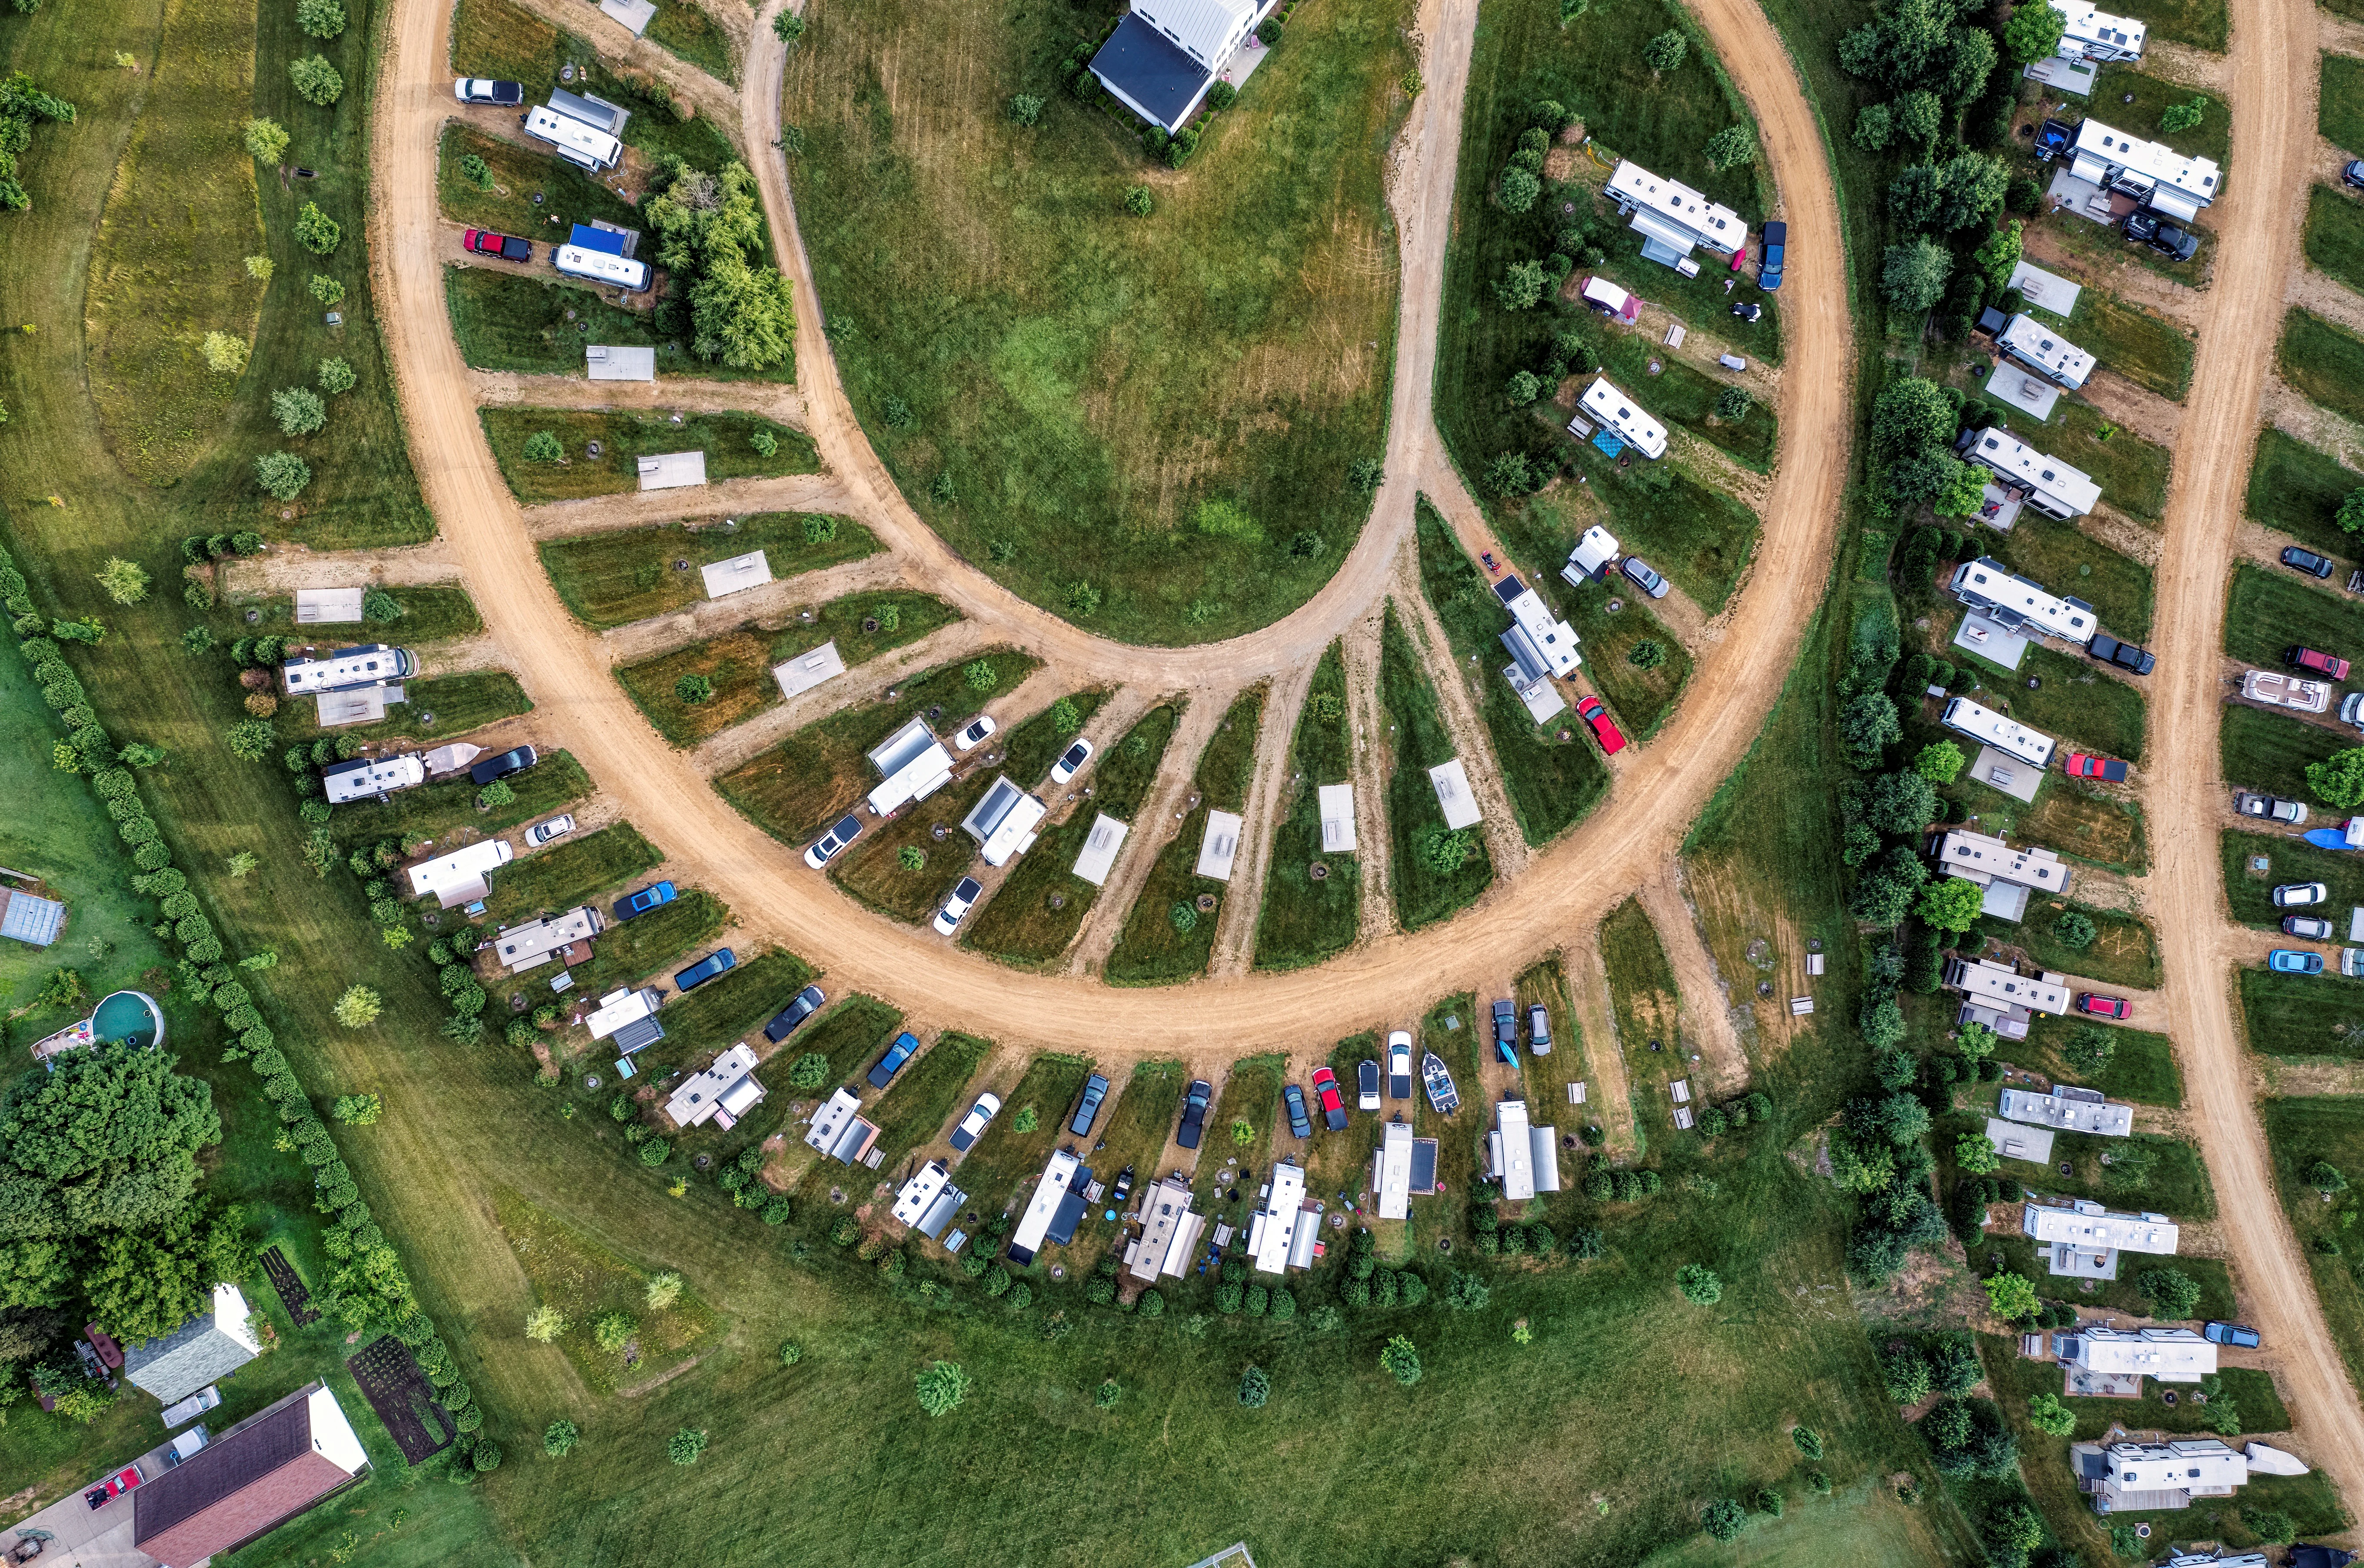 bird view on trailers with cars and trucks by a dirt road with a nice bend resulting in an organic pattern